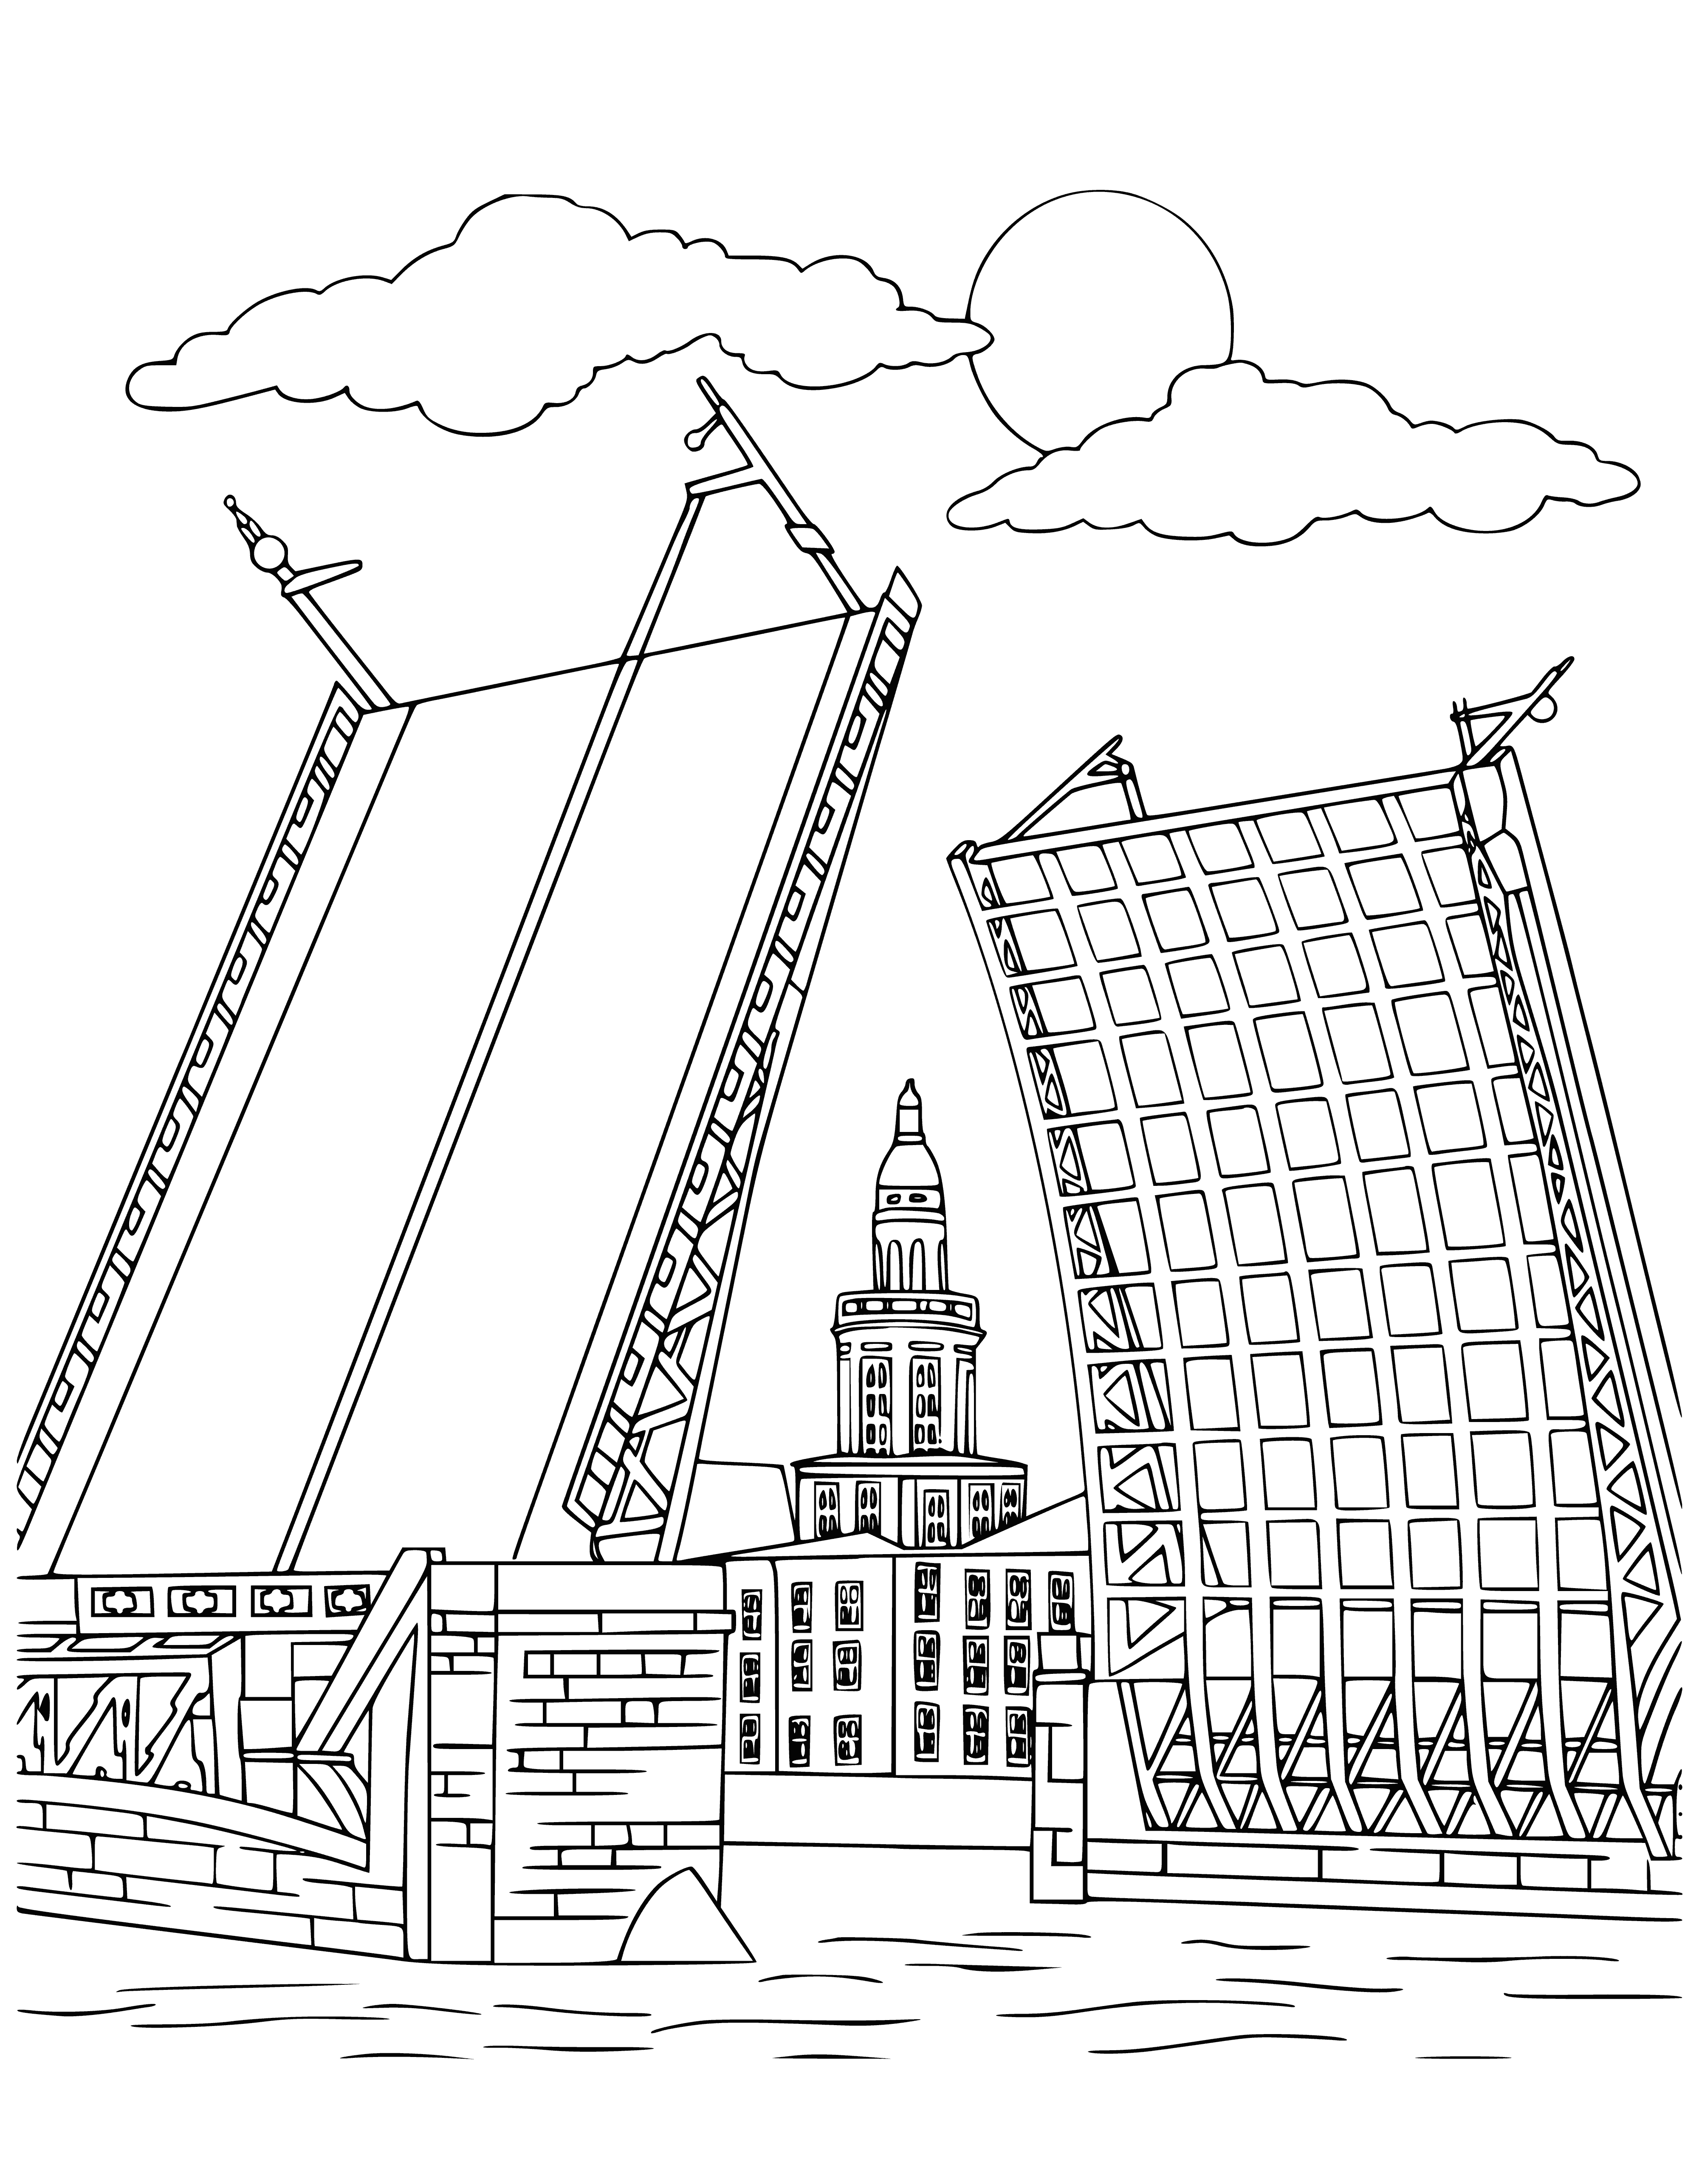 coloring page: Cityscape with drawbridge spanning a river, adorned with lanterns and clouds in the sky.